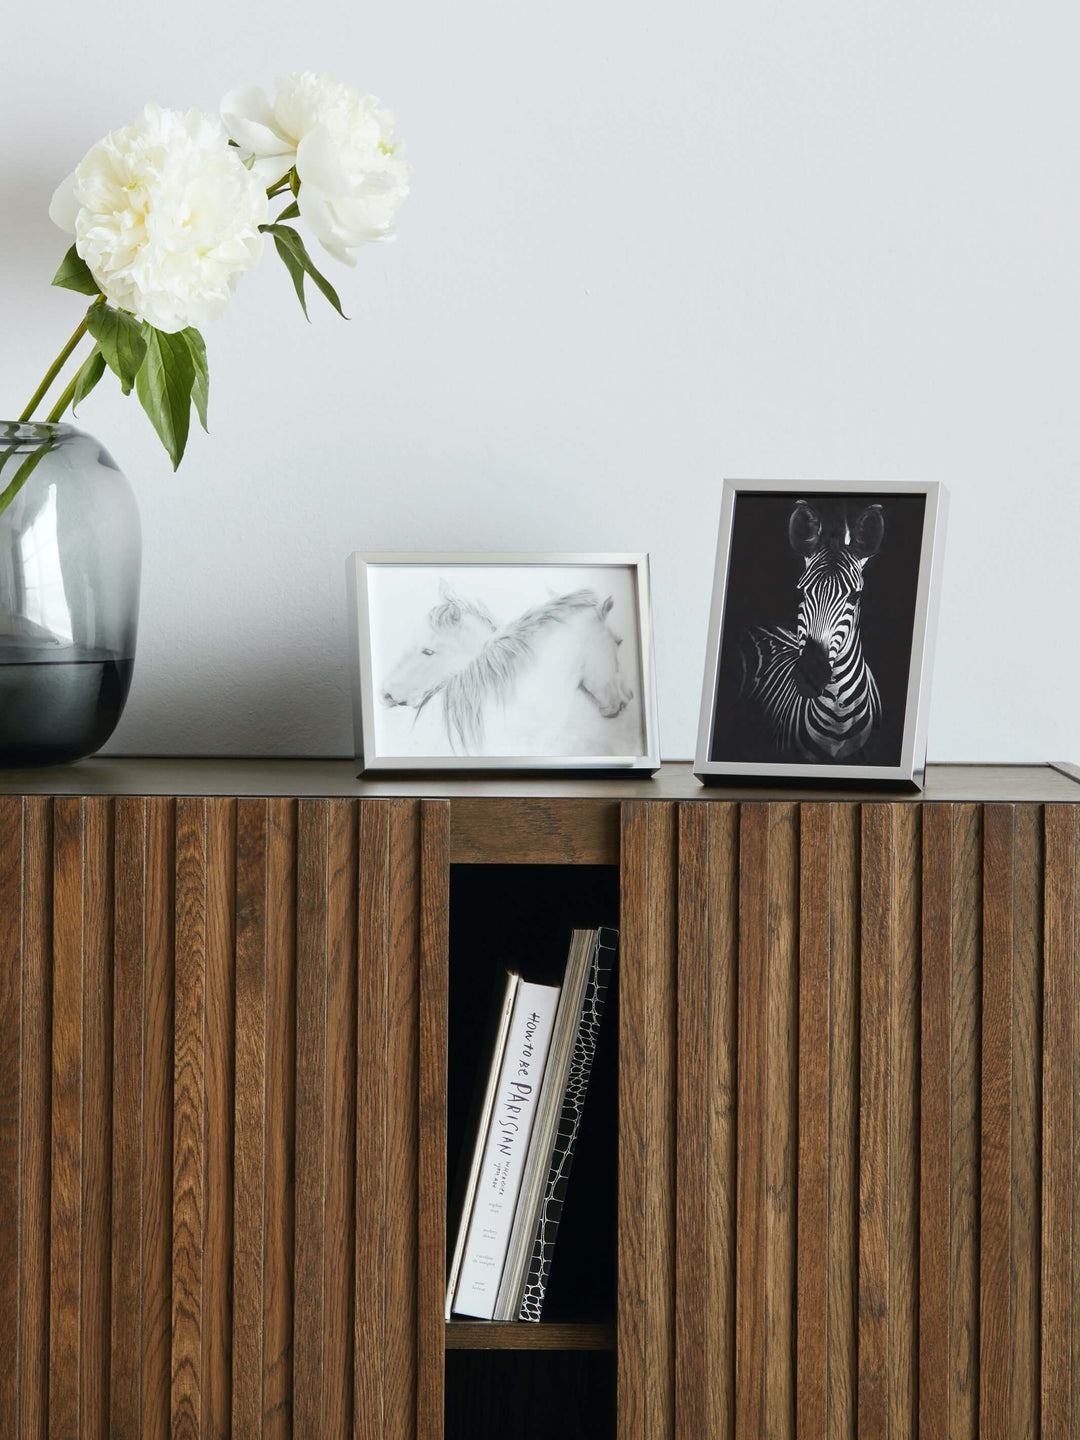 5x7 Silver Picture Frames From Vossington on a Sideboard